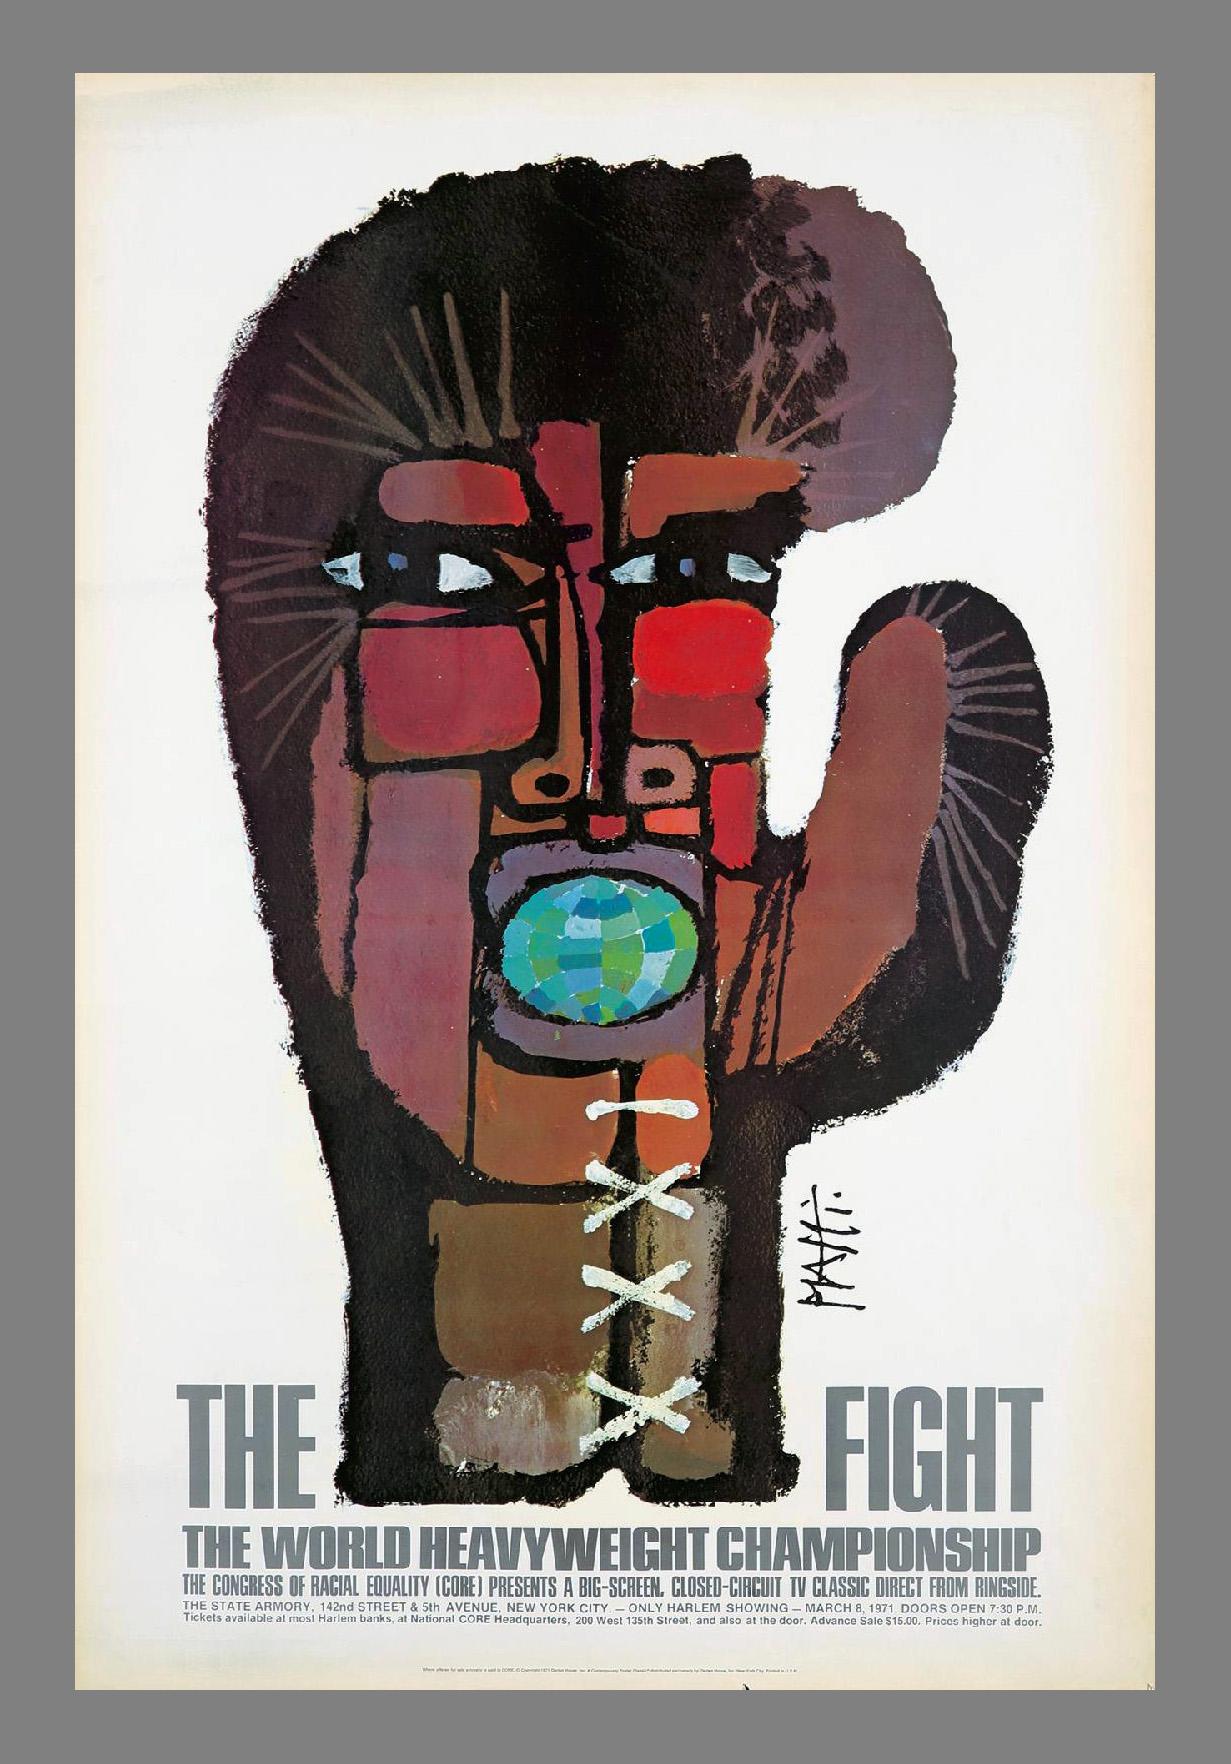 'The Fight' by Celestino Piatti
The 30 x 45 inch poster was created by Swiss artist Celestino Piatti in 1971 to advertise the exclusive viewing in Harlem of the first Ali/Frazier fight on March 8, 1971 at Madison Square Garden. It features a glove